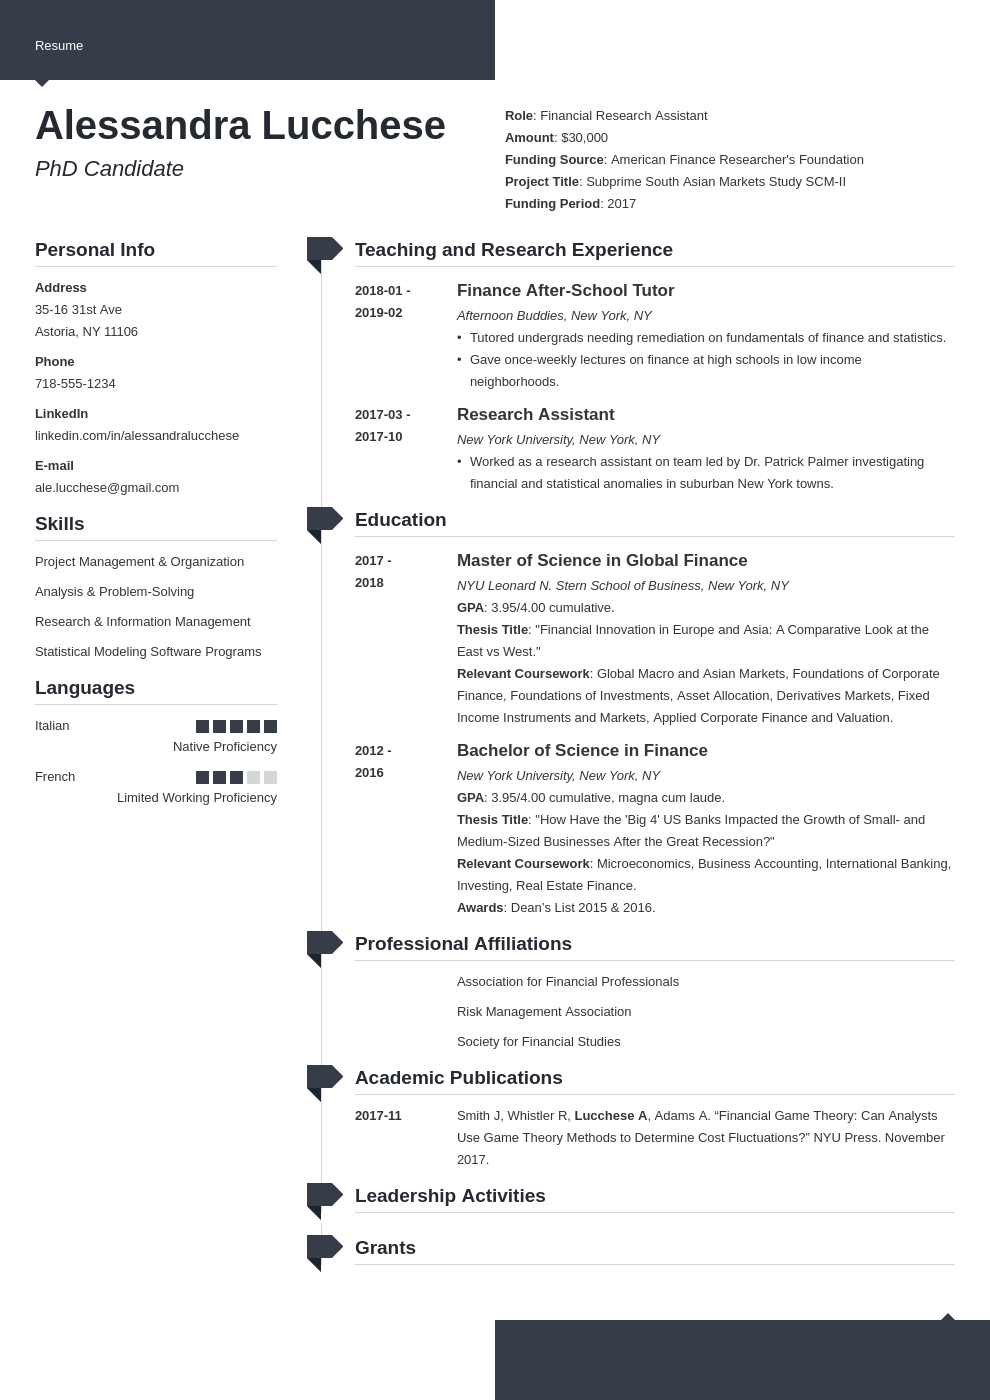 Creating a resume for graduate school admission